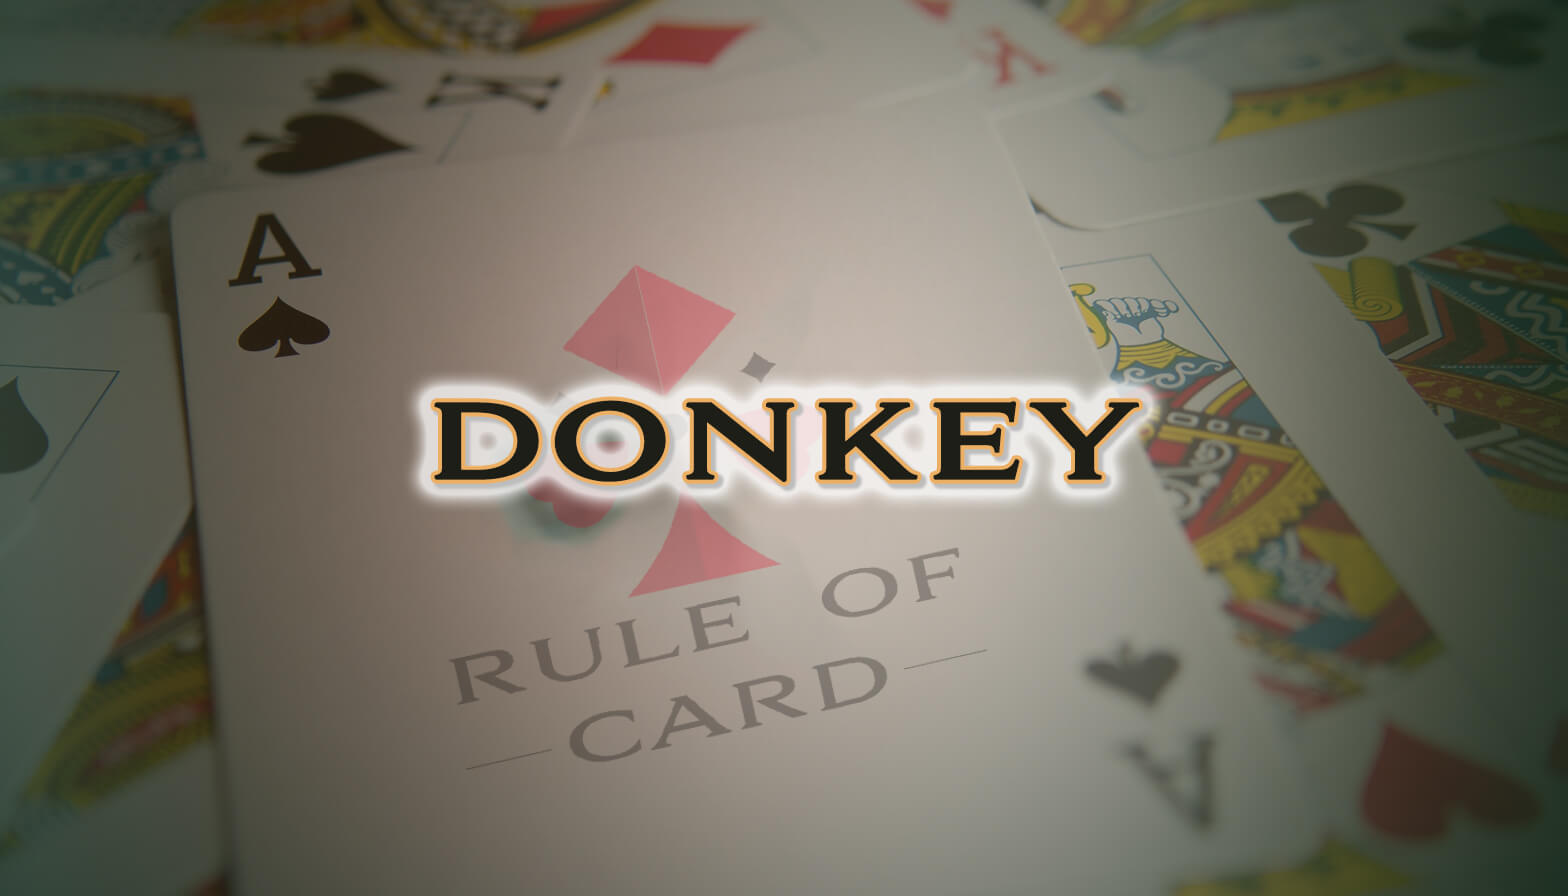 Playing the card game Donkey